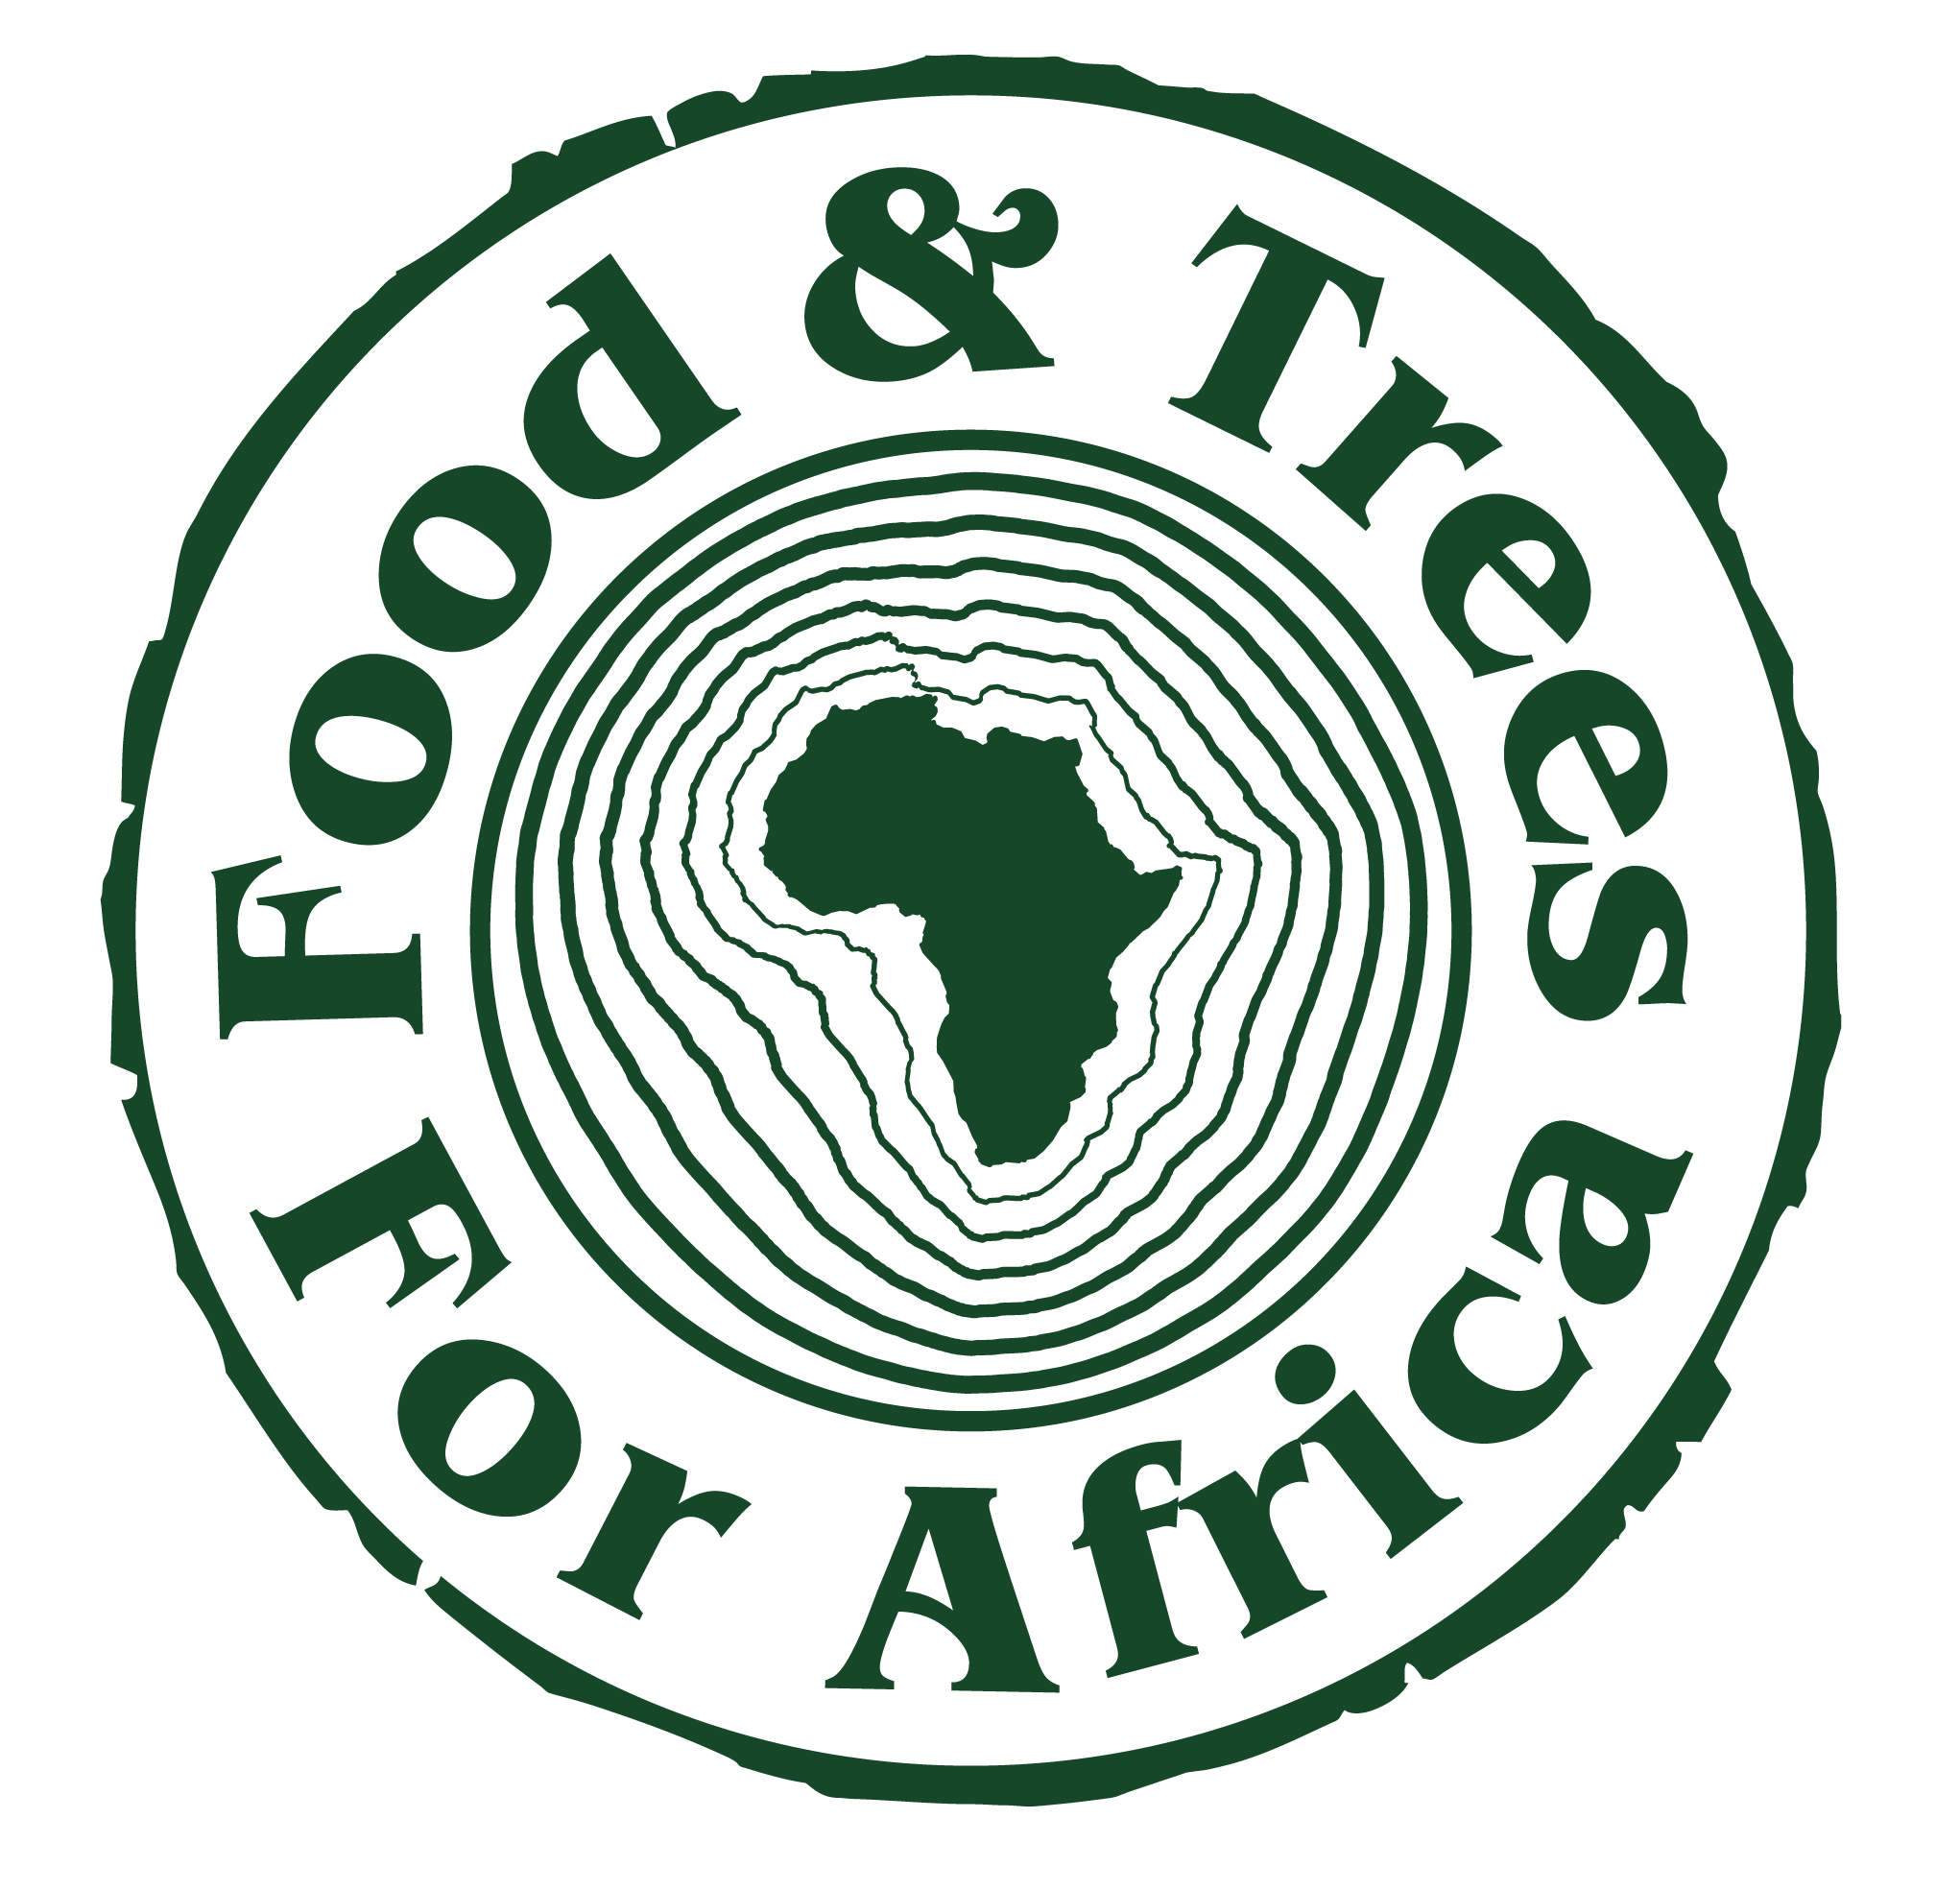 #PODCAST "Food and Trees for Africa" warn that July's fuel hikes could exacerbate food insecurity in SA